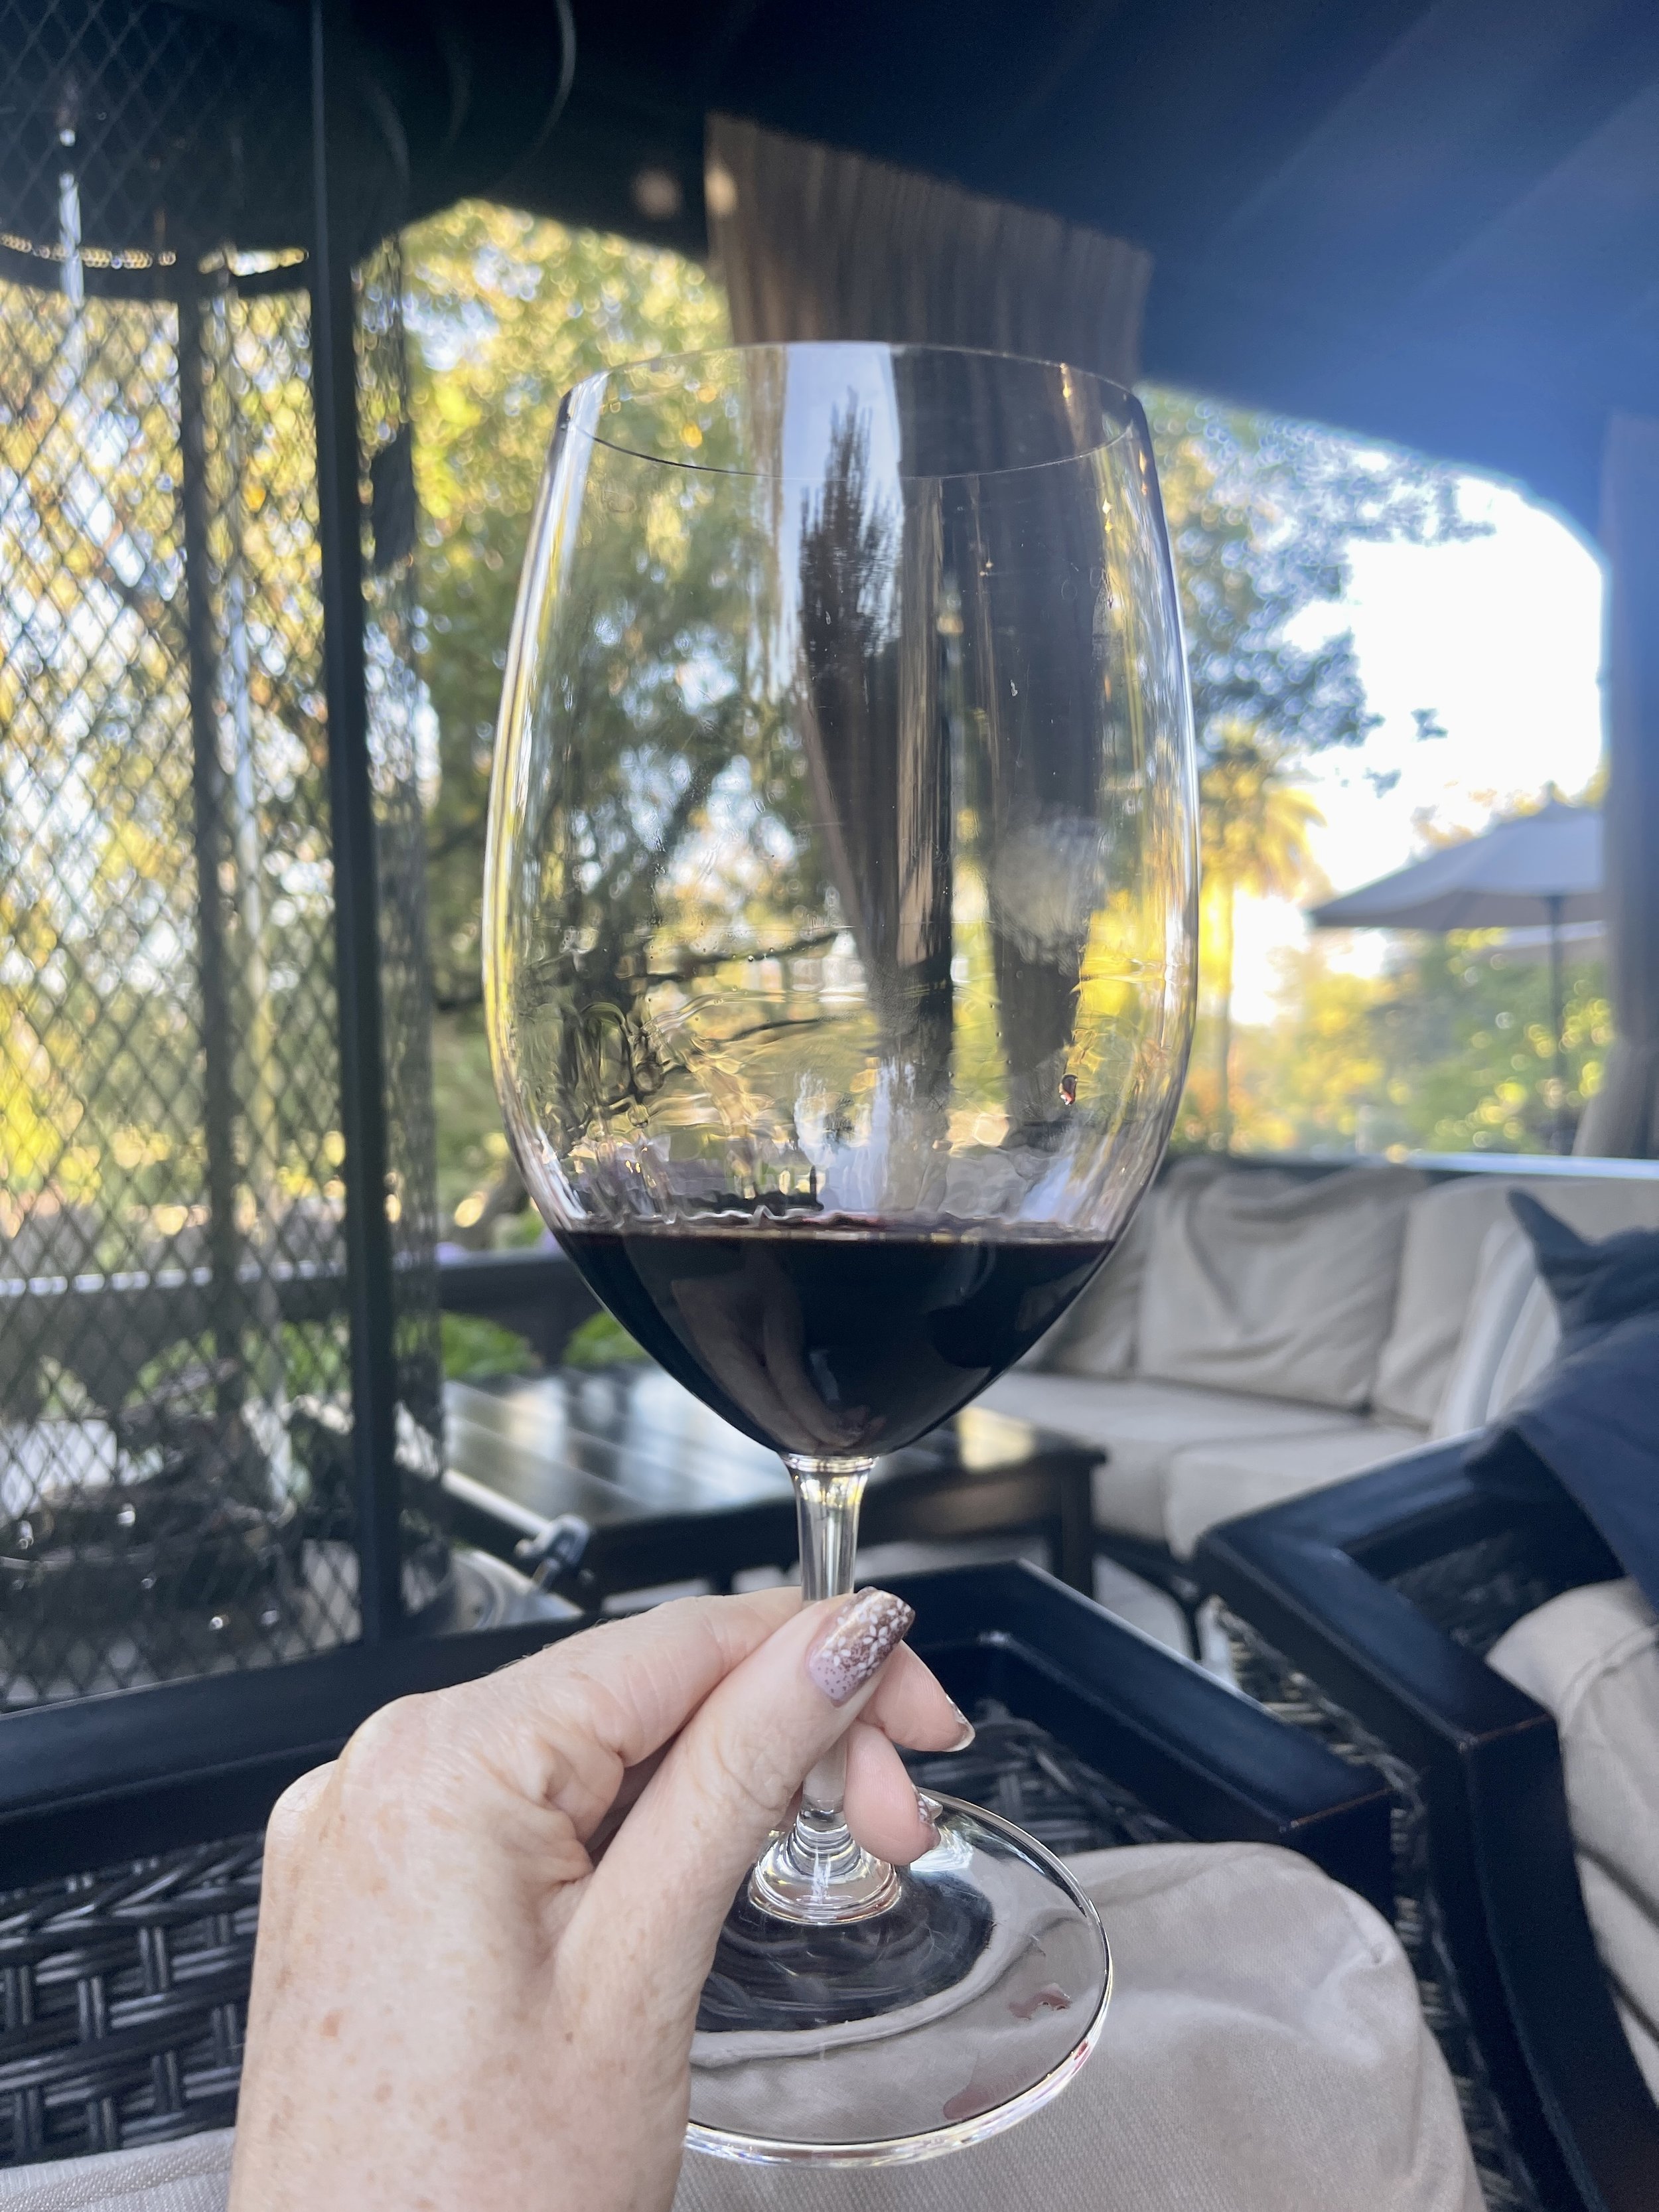 Beringer Vineyard wine tastings review. In this Beringer Vineyards review, I’ll tell you everything you need to know before you visit this historic Napa Valley winery.